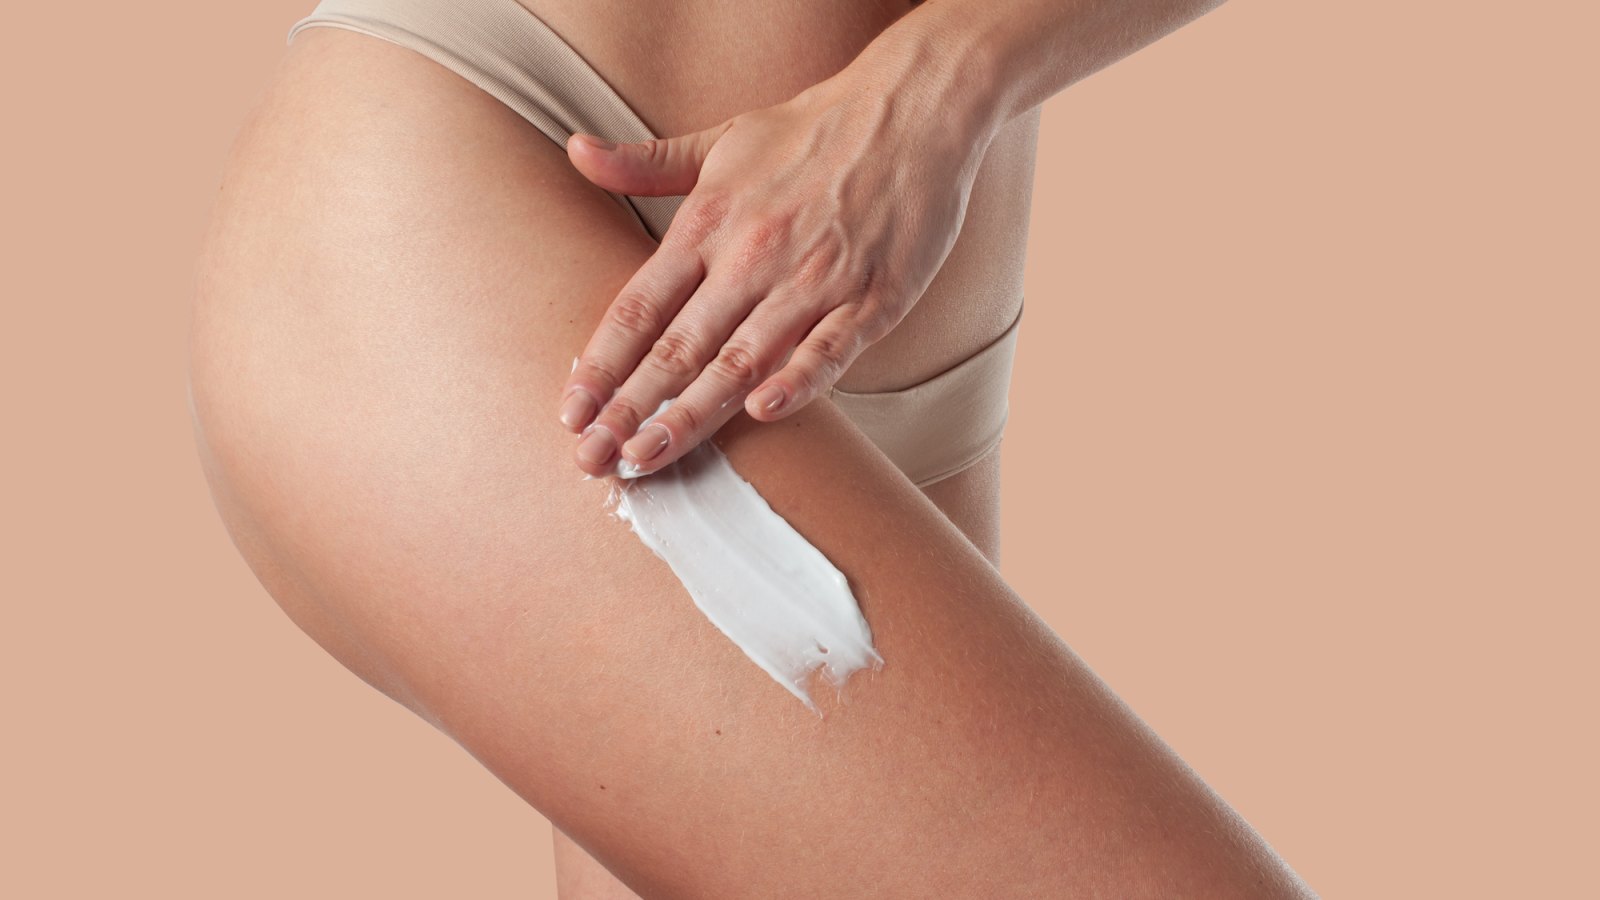 Bliss $18 Cellulite Cream Is Seriously Impressing Reviewers